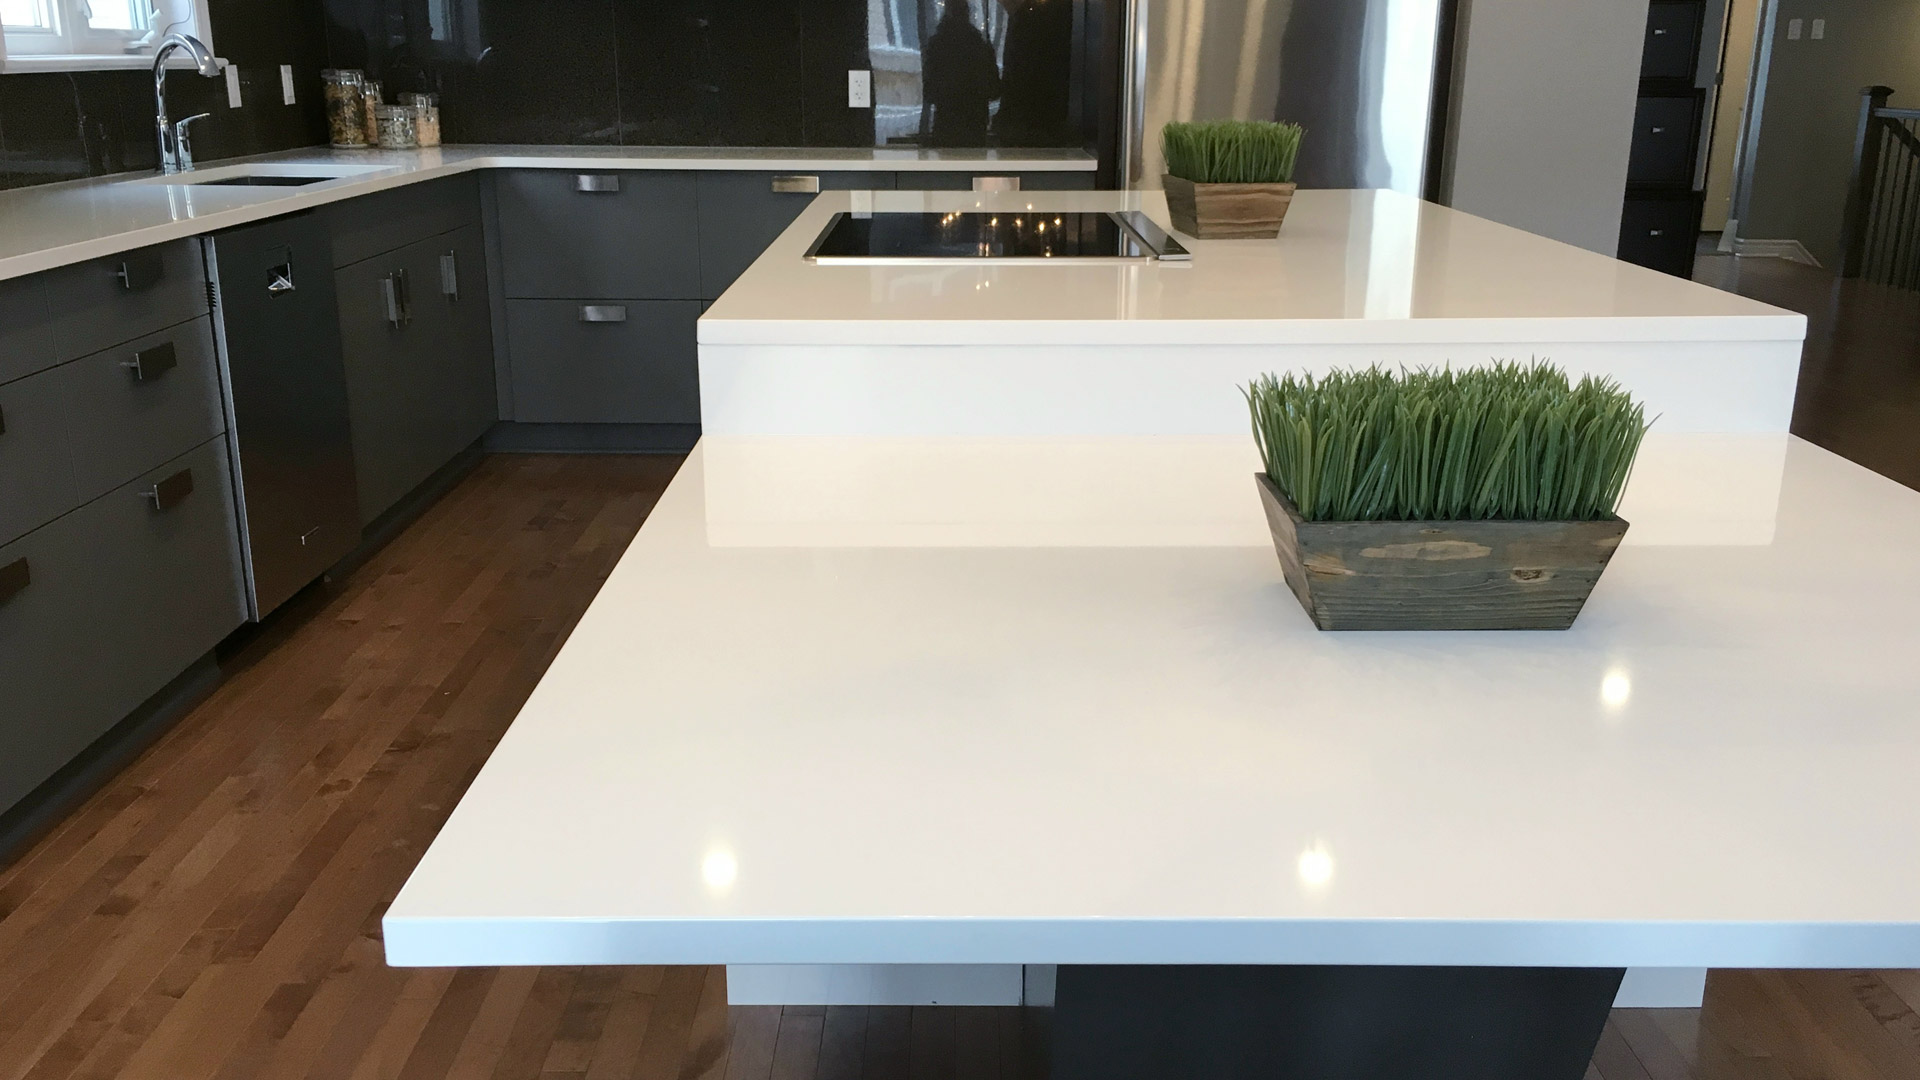 Countertop remodeling and construction